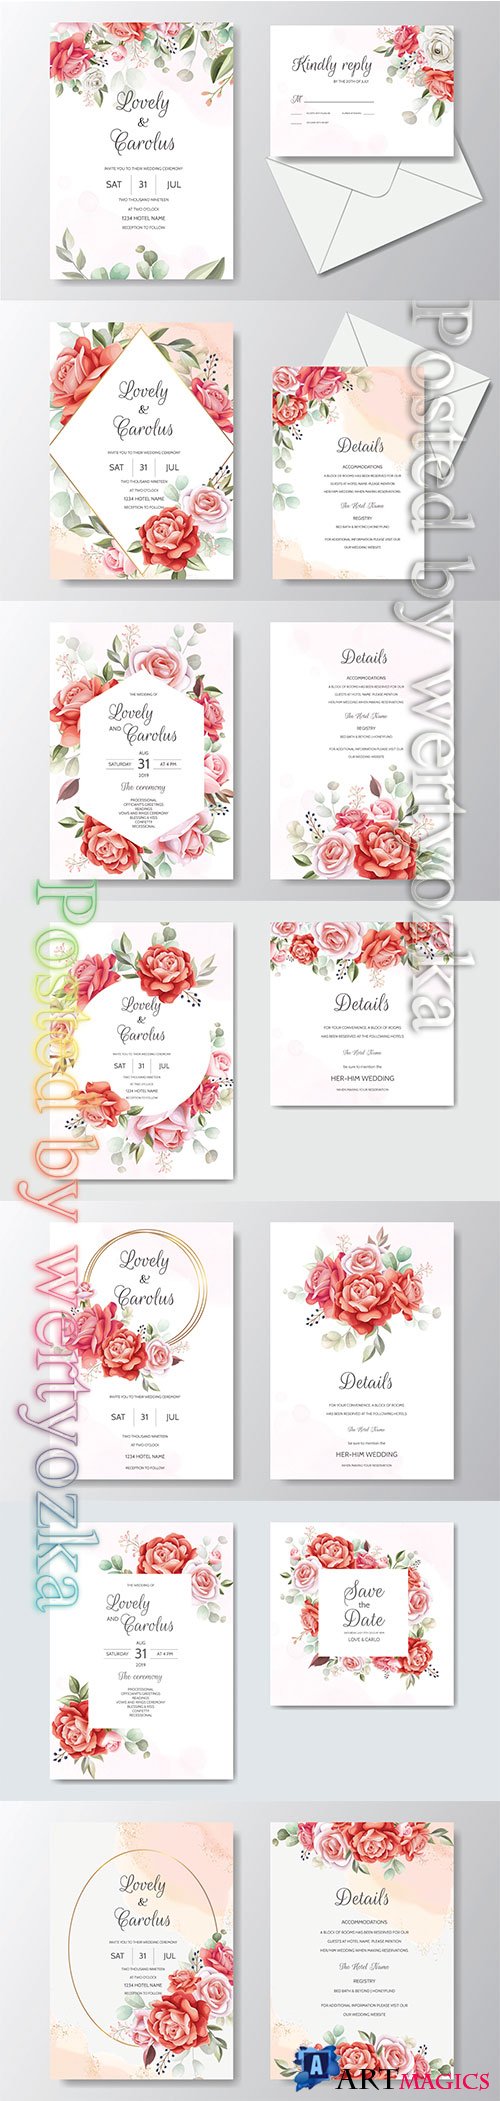 Wedding invitations with beautiful flowers and sophisticated design